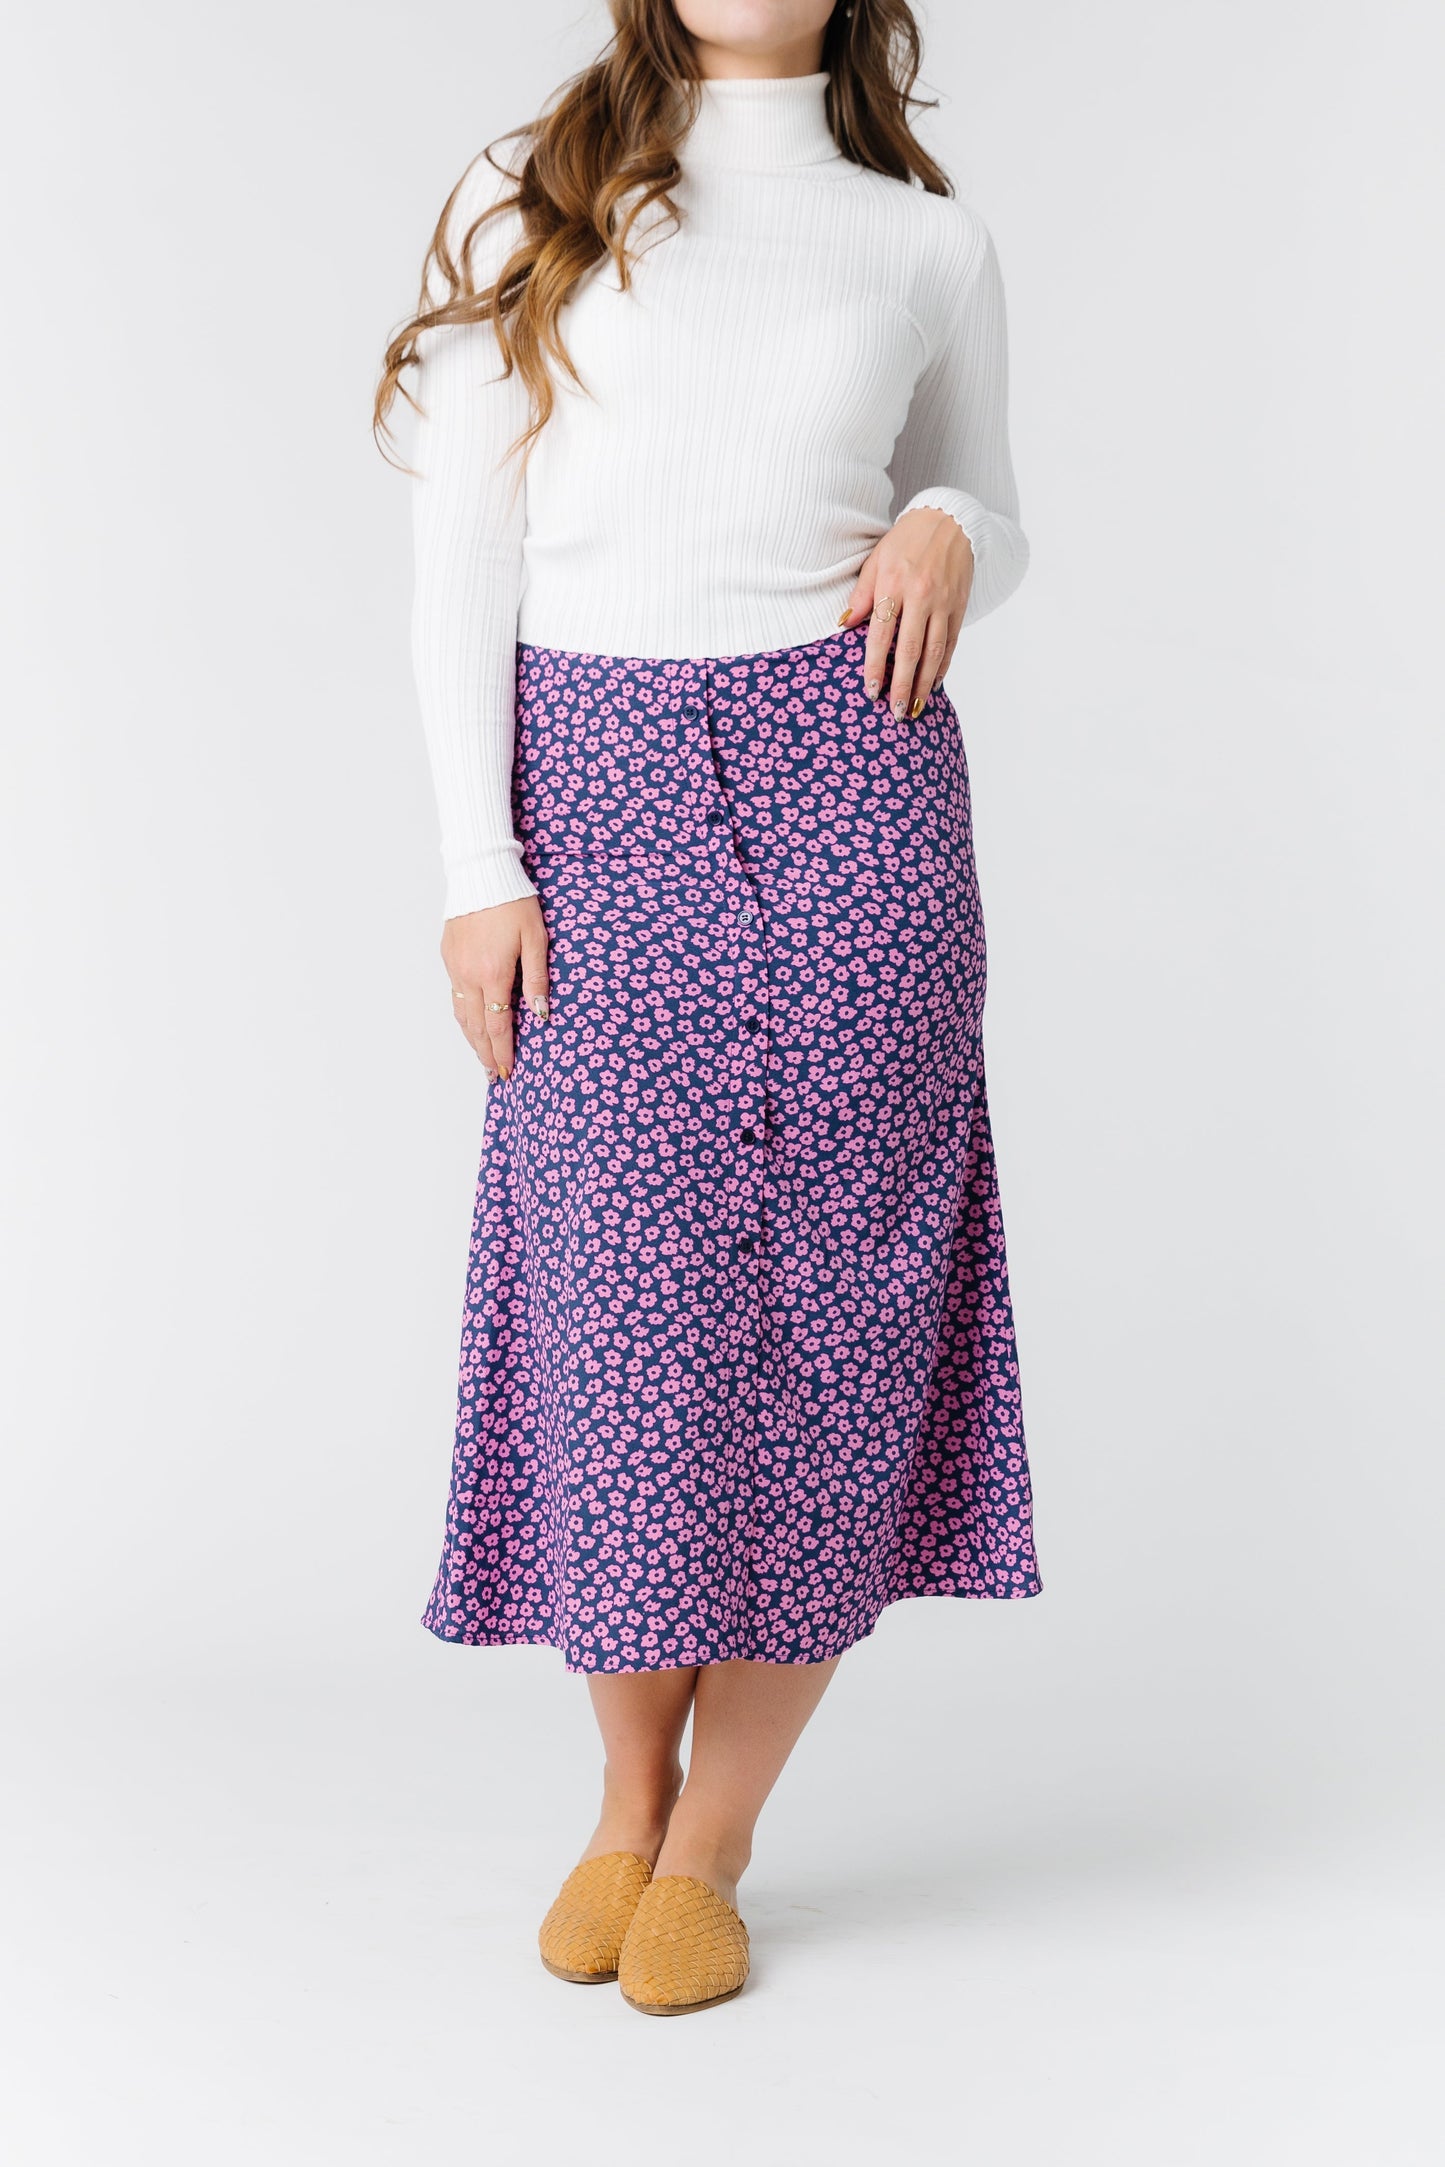 Rio Bold Floral Skirt WOMEN'S SKIRTS Things Between Navy-Pink S 